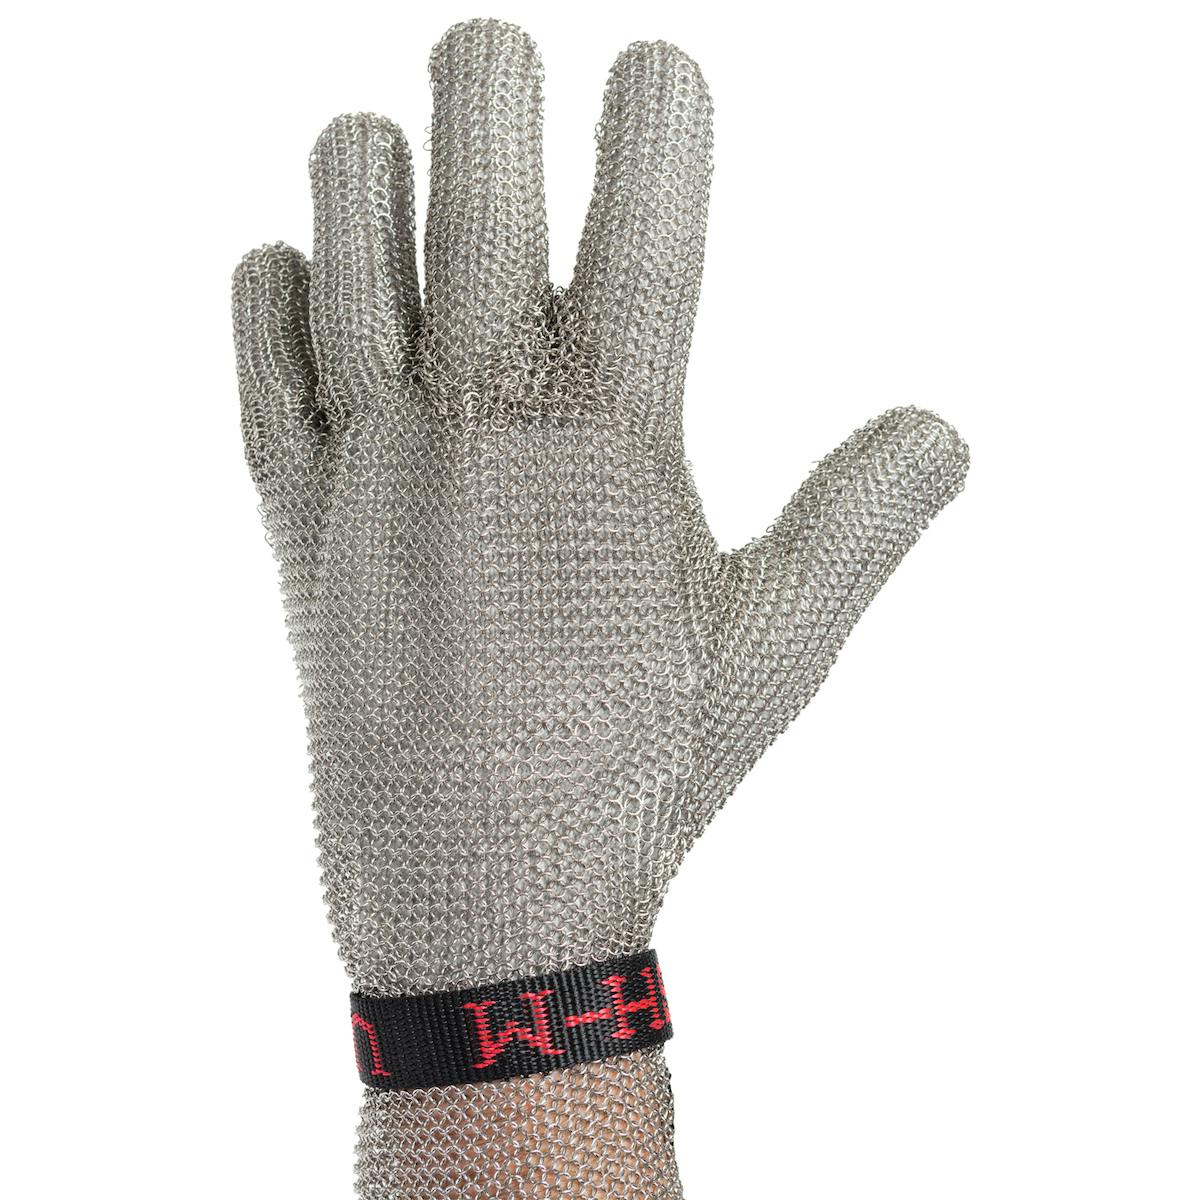 US Mesh® Stainless Steel Mesh Glove with Reinforced Finger Crotch and Adjustable Straps - Forearm Length (USM-1350)